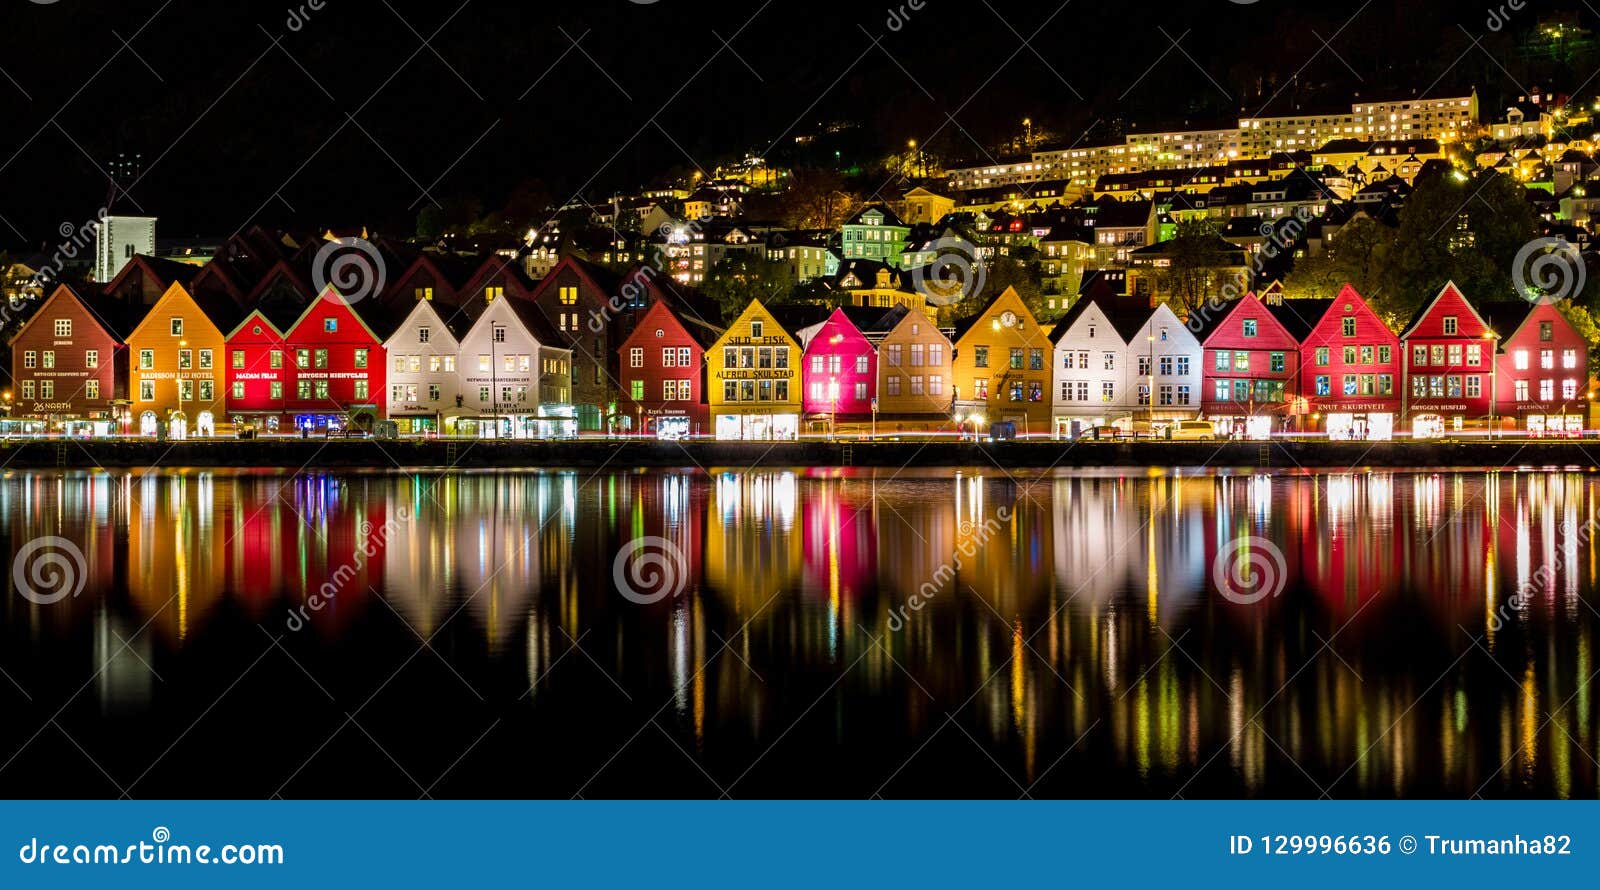 traditional norwegian houses at bryggen, a unesco world cultural heritage site and famous destination in bergen, norway